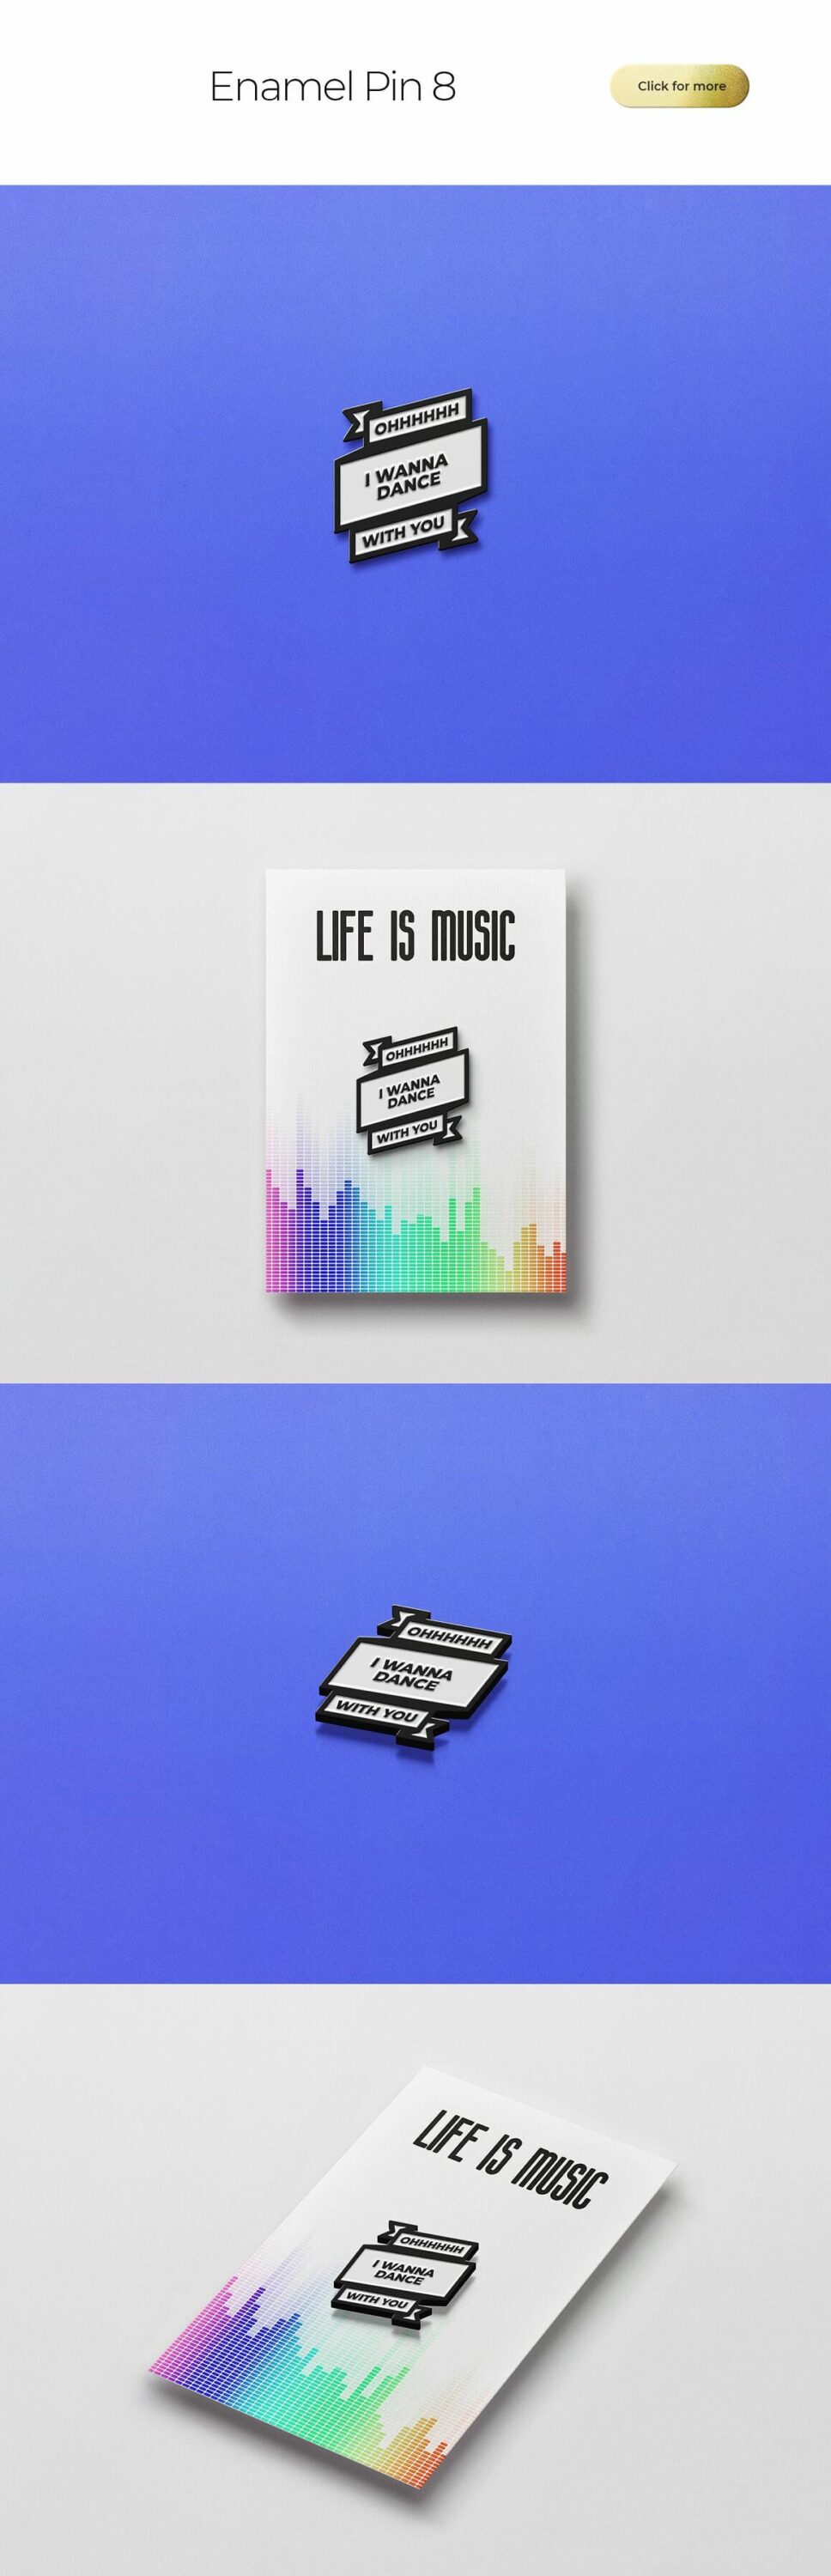 Cards with inscription "Life is music" on the white and blue backgrounds.